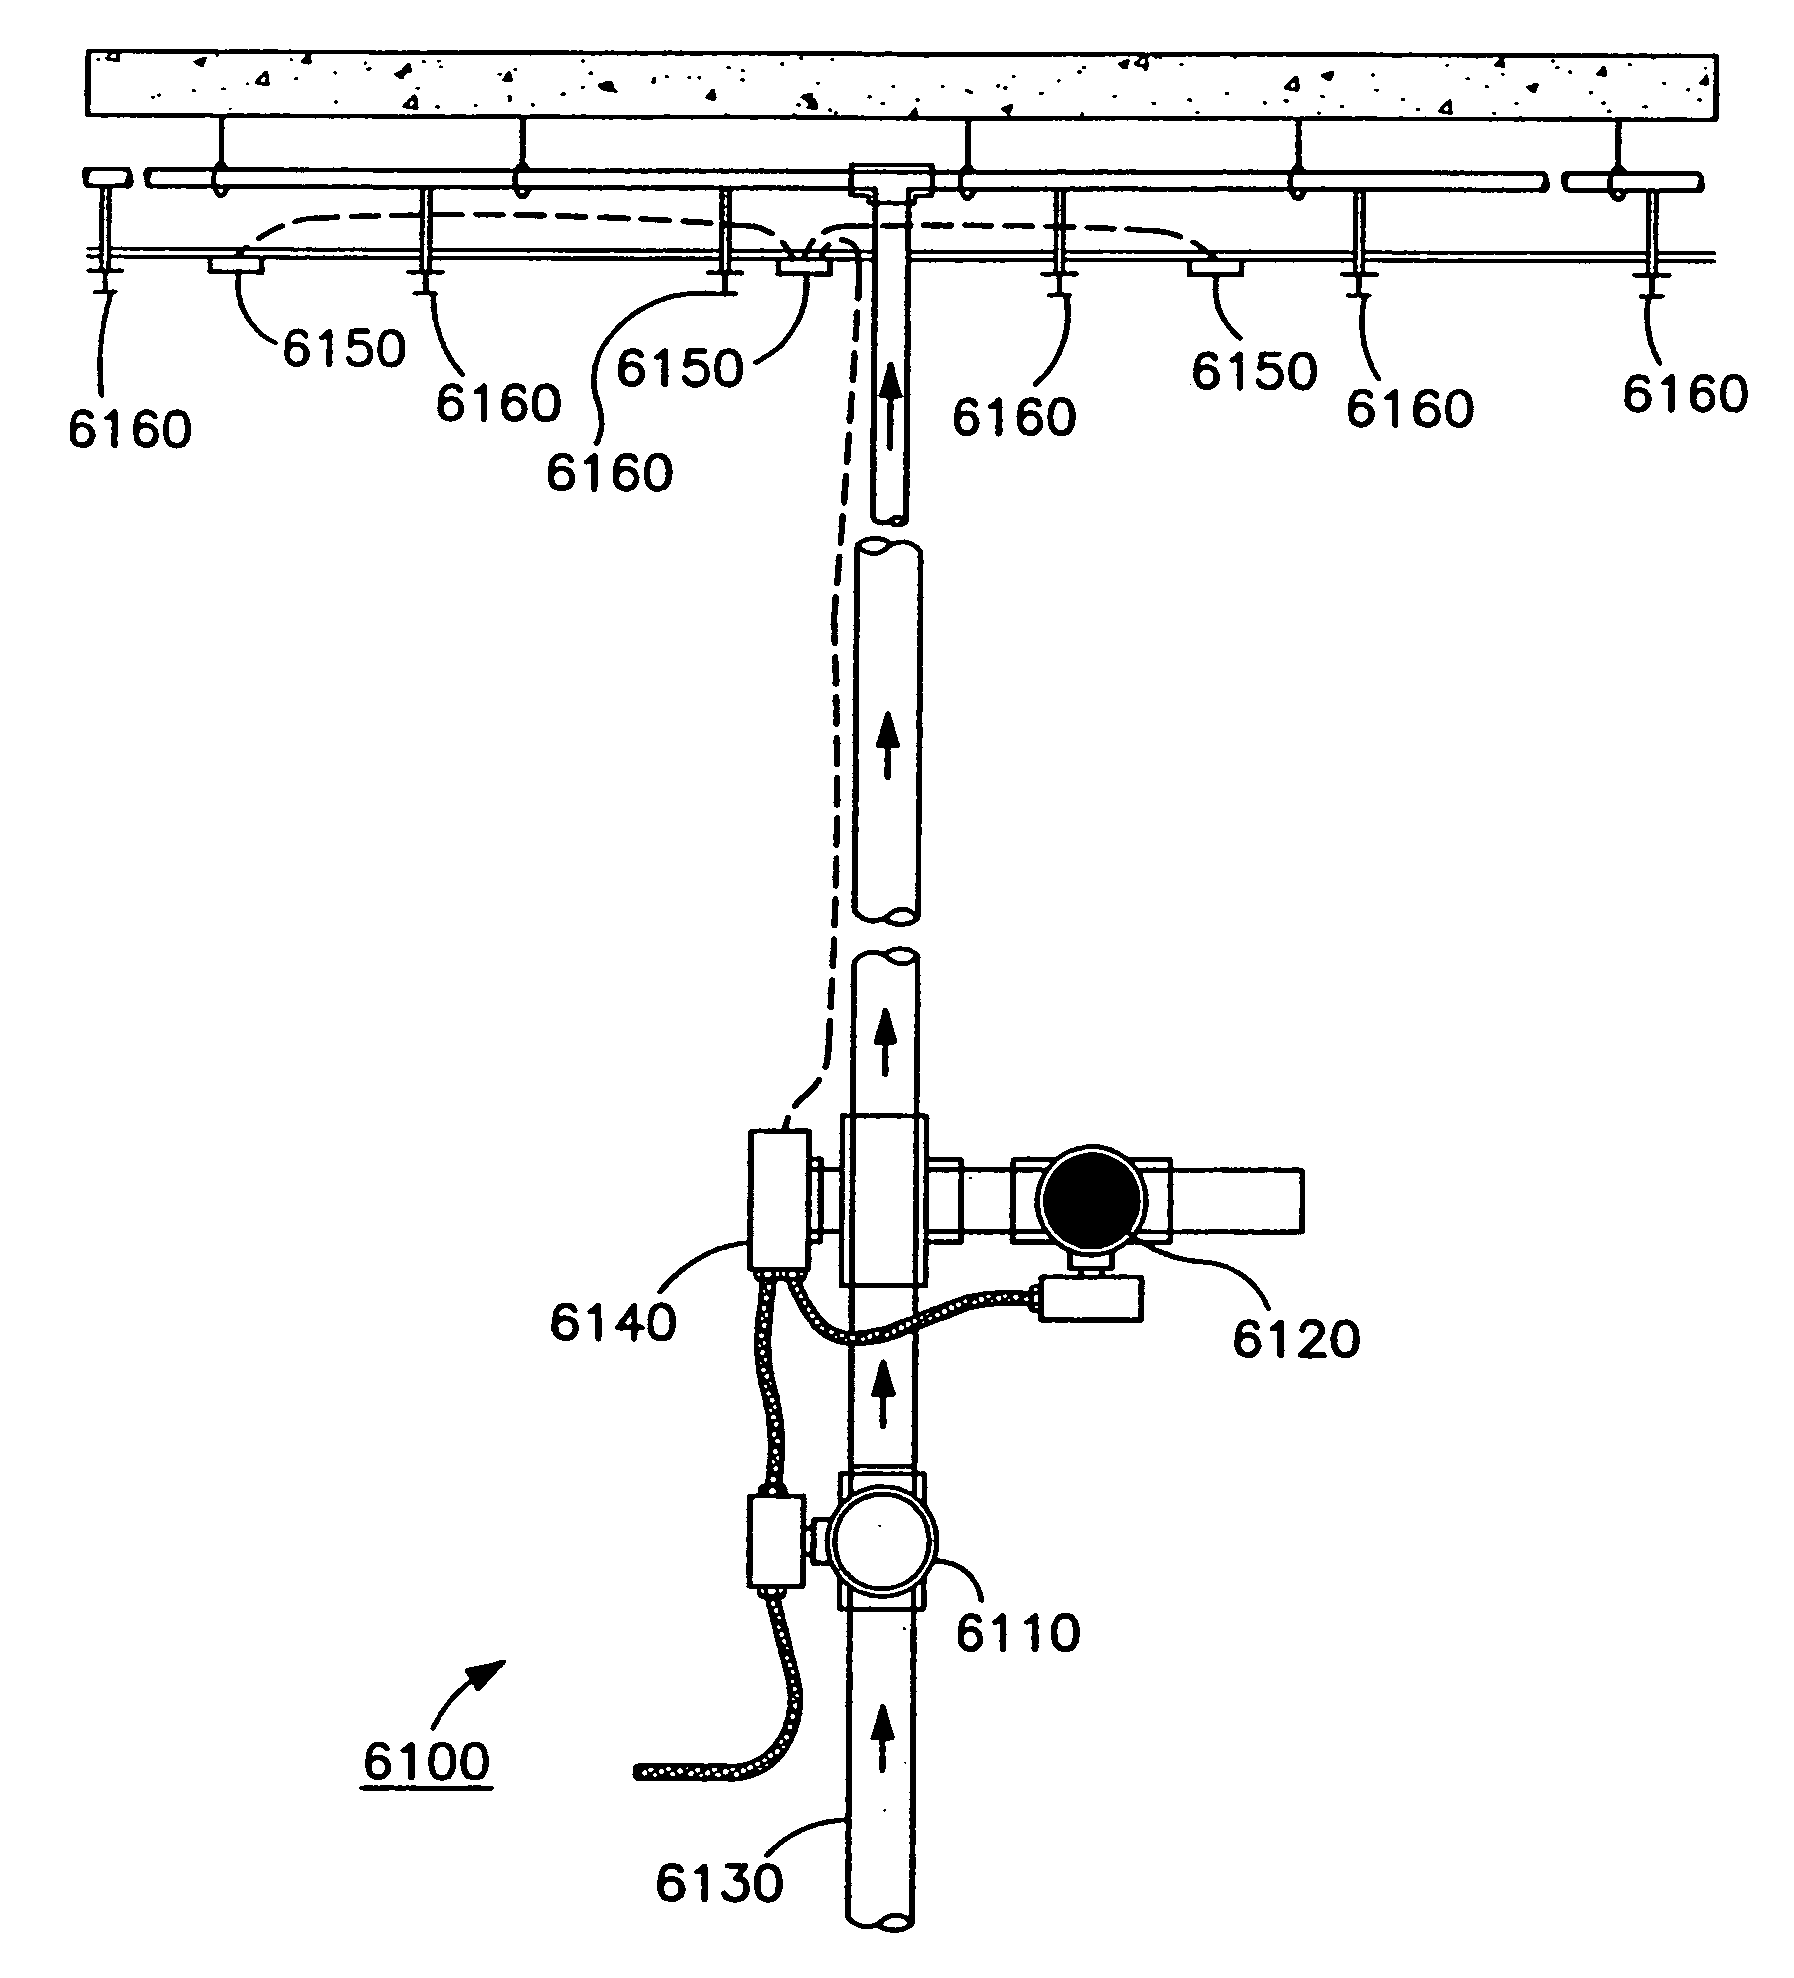 Systems and methods for monitoring and controlling water consumption